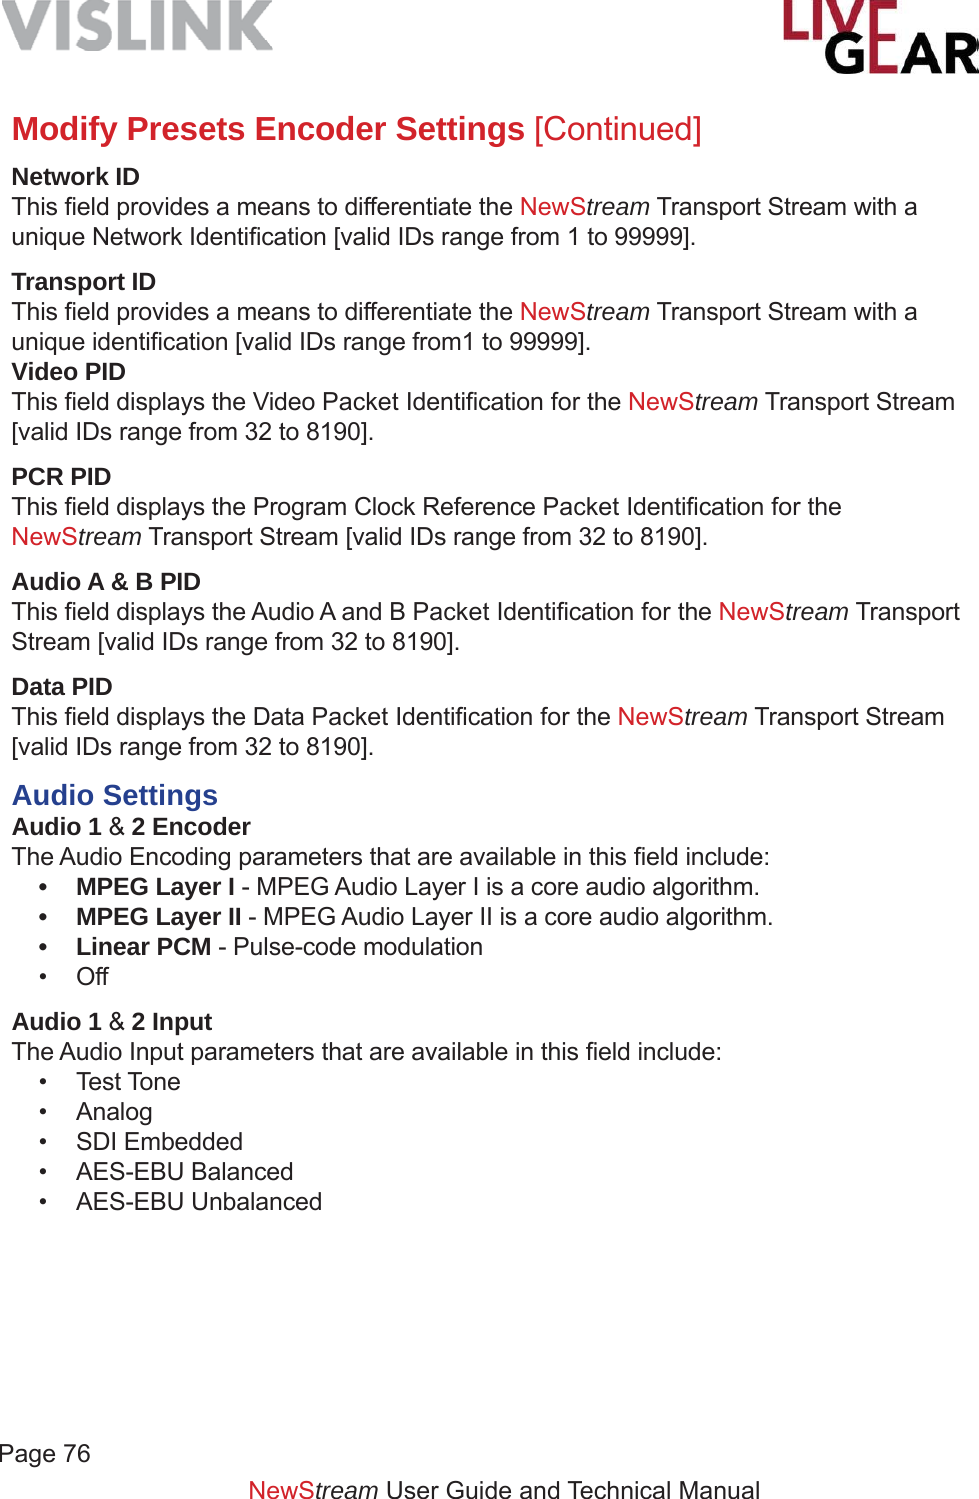 Page 76NewStream User Guide and Technical ManualModify Presets Encoder Settings [Continued]Network IDThis ﬁ eld provides a means to differentiate the NewStream Transport Stream with a unique Network Identiﬁ cation [valid IDs range from 1 to 99999]. Transport IDThis ﬁ eld provides a means to differentiate the NewStream Transport Stream with a unique identiﬁ cation [valid IDs range from1 to 99999].Video PIDThis ﬁ eld displays the Video Packet Identiﬁ cation for the NewStream Transport Stream [valid IDs range from 32 to 8190].PCR PIDThis ﬁ eld displays the Program Clock Reference Packet Identiﬁ cation for the NewStream Transport Stream [valid IDs range from 32 to 8190].Audio A &amp; B PIDThis ﬁ eld displays the Audio A and B Packet Identiﬁ cation for the NewStream Transport Stream [valid IDs range from 32 to 8190].Data PIDThis ﬁ eld displays the Data Packet Identiﬁ cation for the NewStream Transport Stream [valid IDs range from 32 to 8190].Audio SettingsAudio 1 &amp; 2 EncoderThe Audio Encoding parameters that are available in this ﬁ eld include:•  MPEG Layer I - MPEG Audio Layer I is a core audio algorithm.•  MPEG Layer II - MPEG Audio Layer II is a core audio algorithm.• Linear PCM - Pulse-code modulation • OffAudio 1 &amp; 2 InputThe Audio Input parameters that are available in this ﬁ eld include:• Test Tone• Analog• SDI Embedded • AES-EBU Balanced• AES-EBU Unbalanced